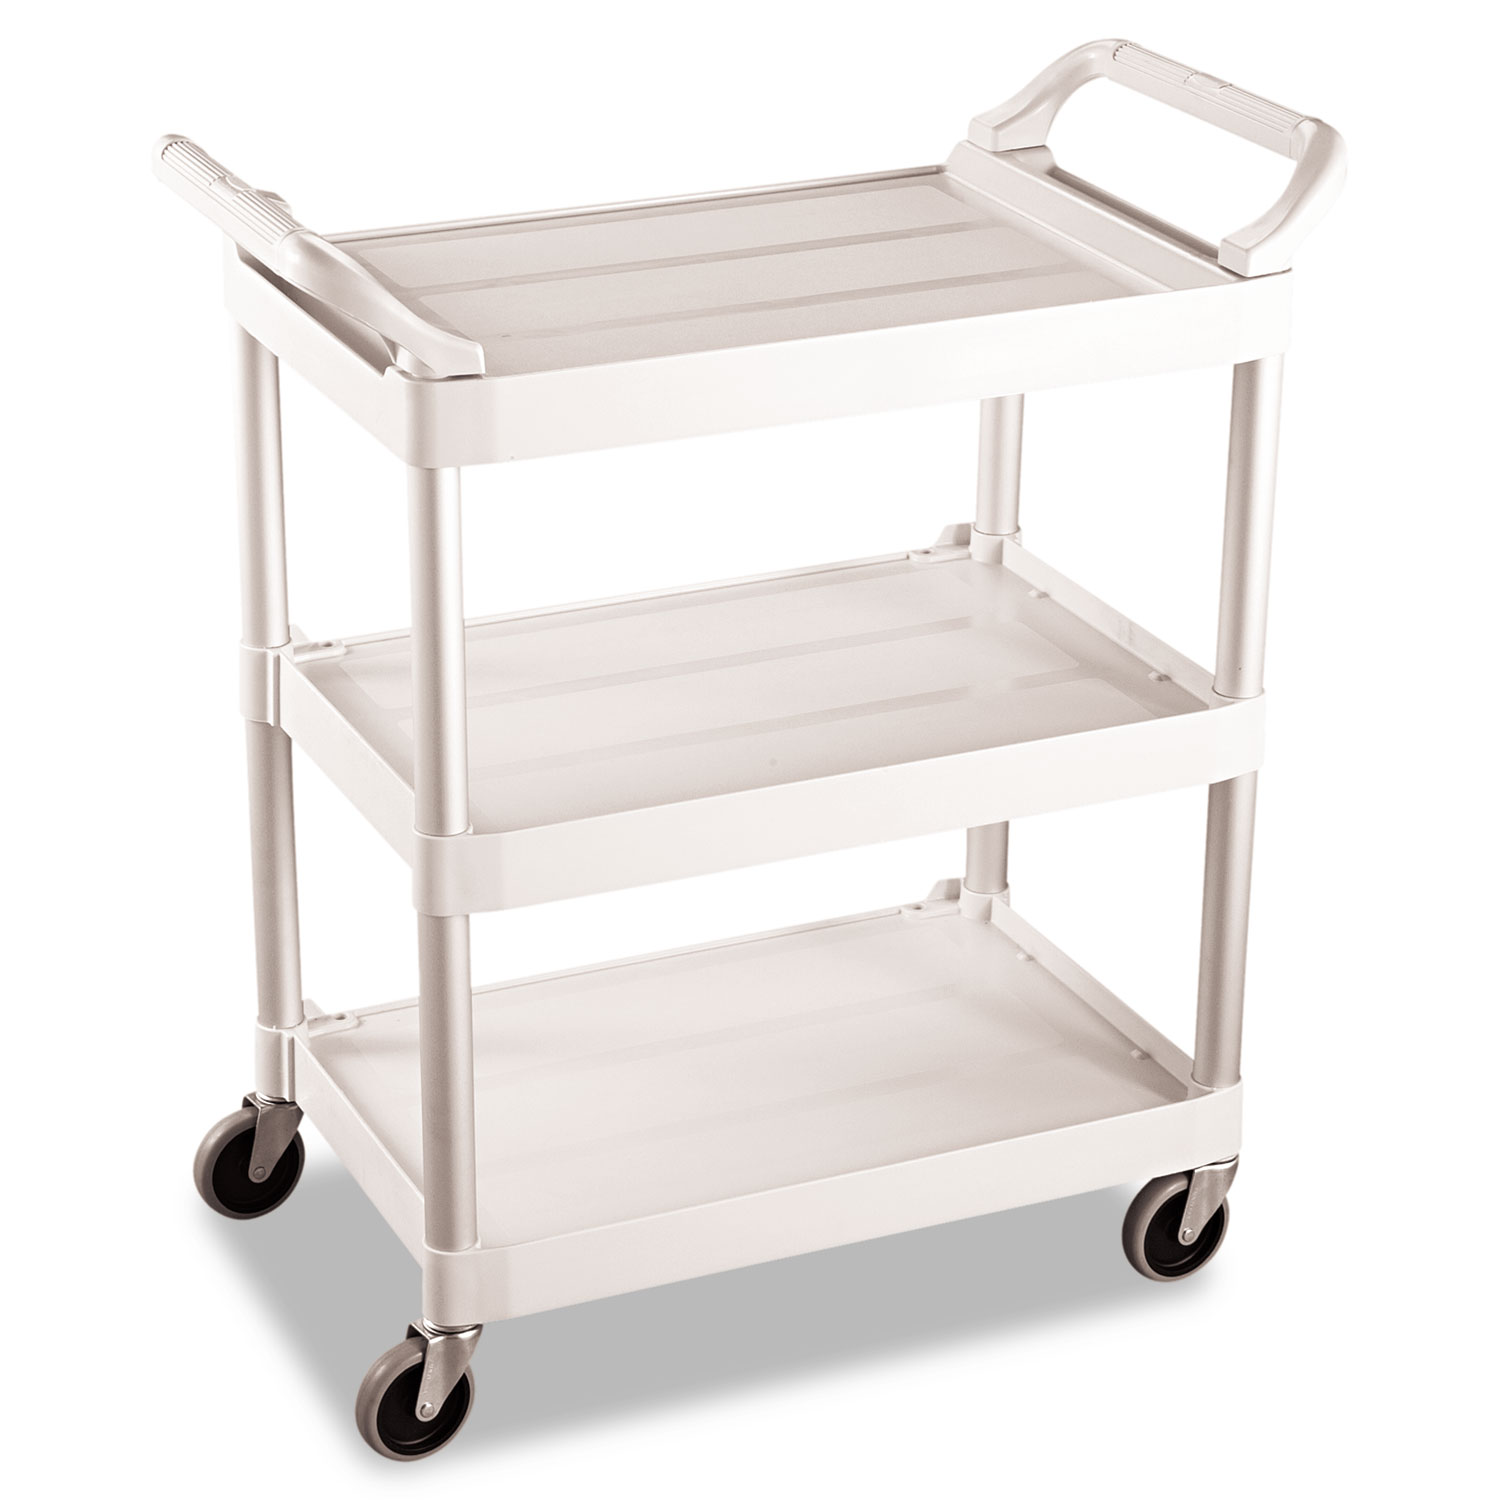  Rubbermaid Commercial 342488OWHT Service Cart, 200-lb Capacity, Three-Shelf, 18.63w x 33.63d x 37.75h, Off-White (RCP342488OWH) 